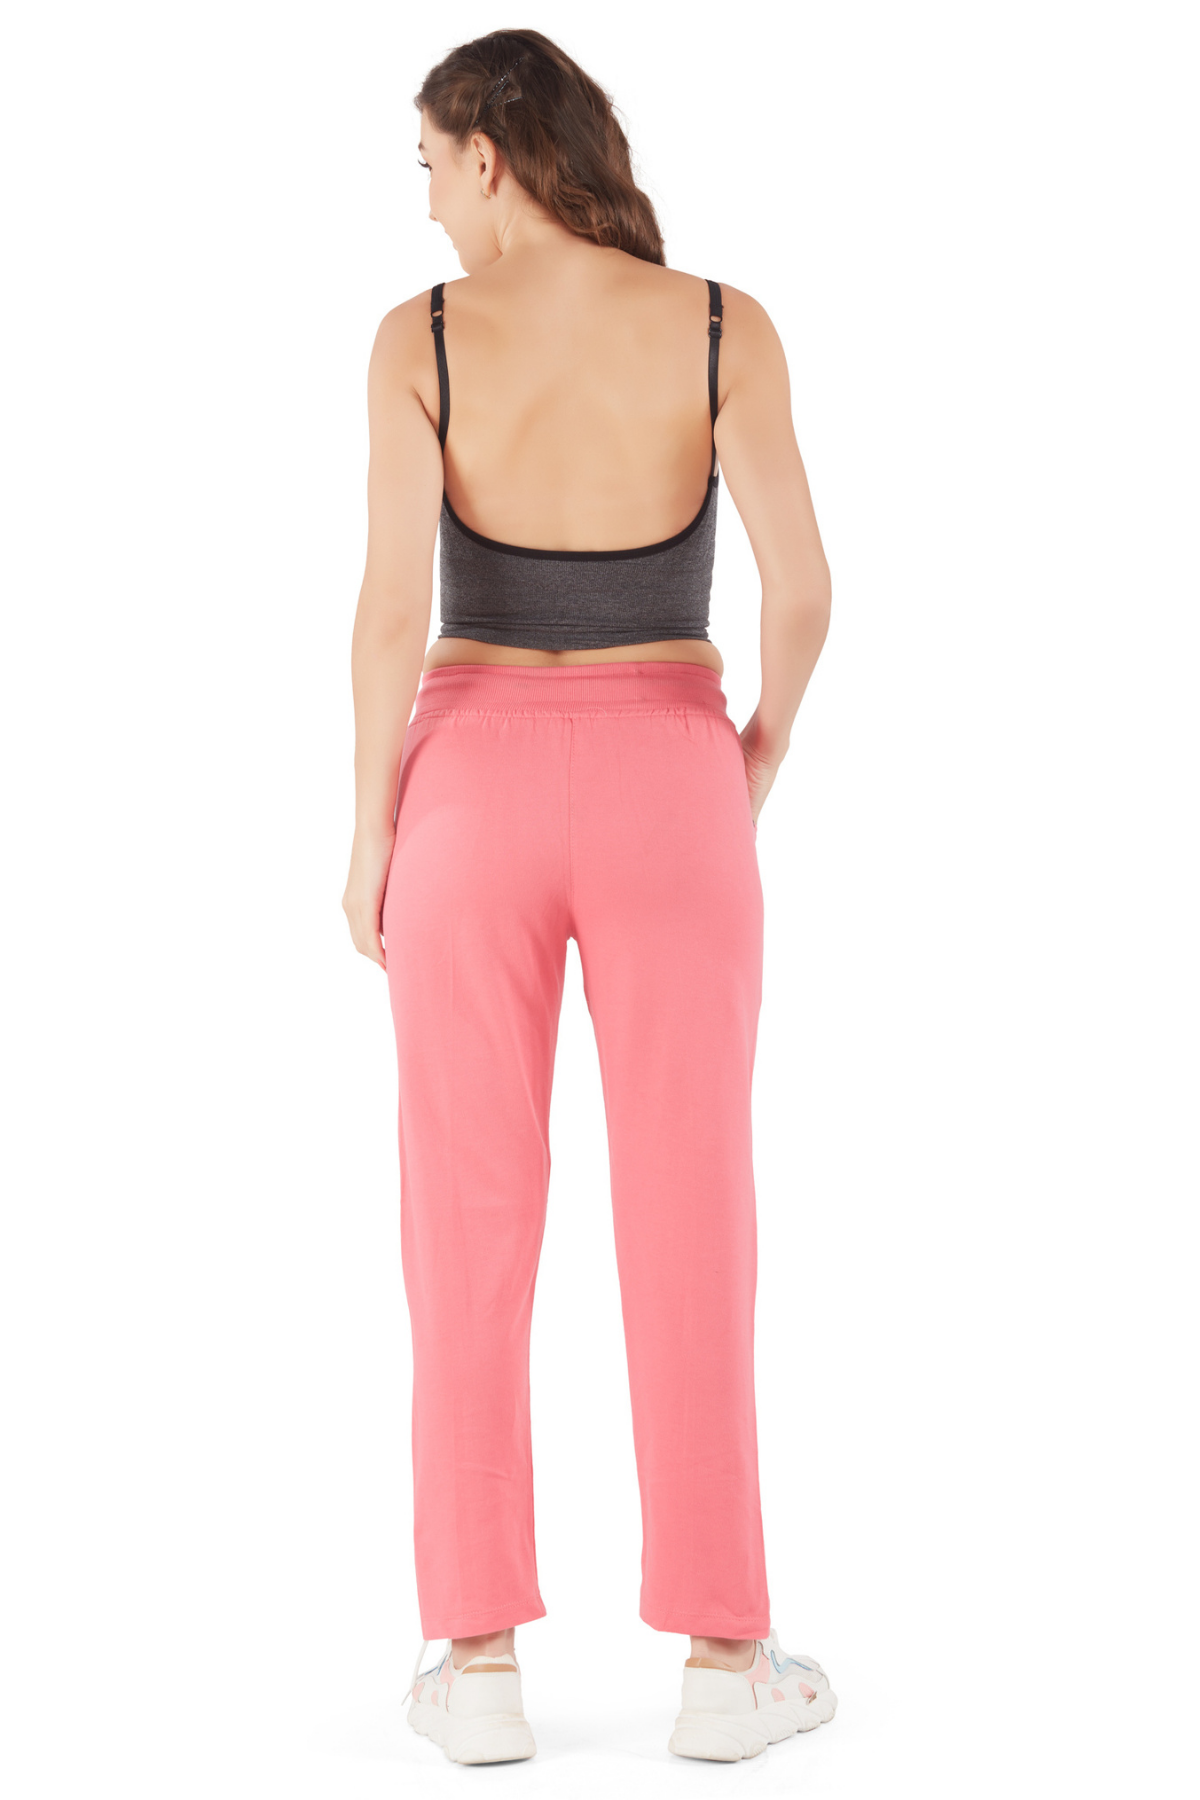 Comfy Pink Cotton Regular Fit Lounge Pants For Women Online In India